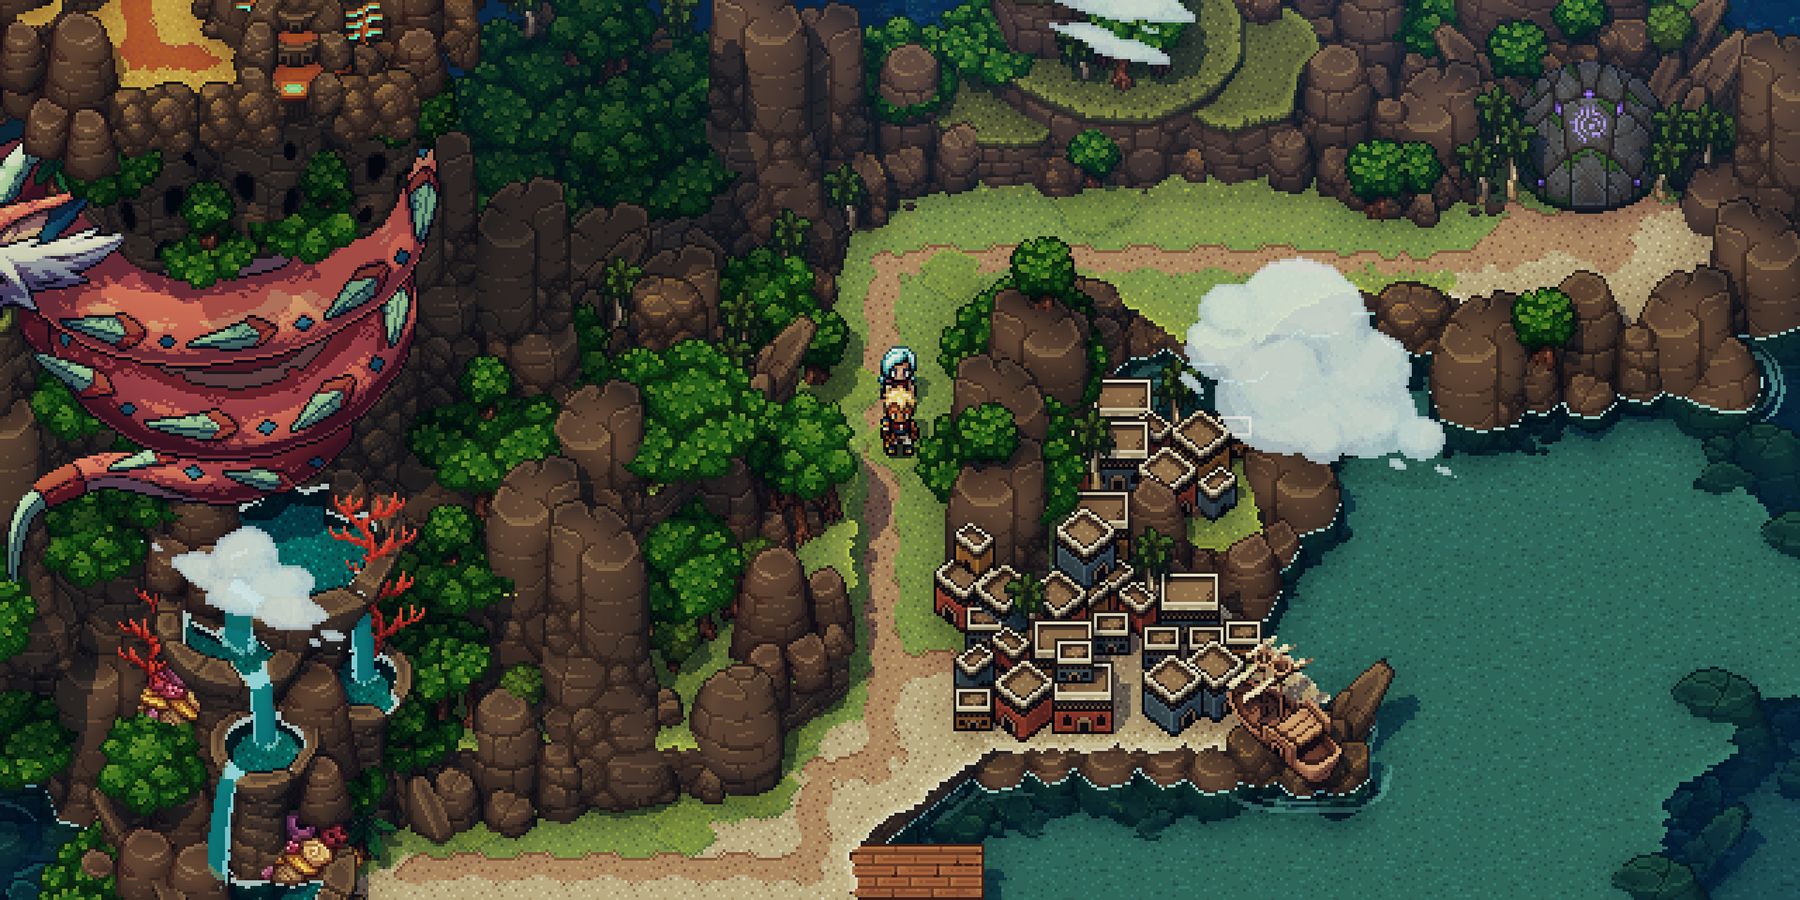 Sea Of Stars Shares In-Depth Look At Chrono Trigger-Inspired